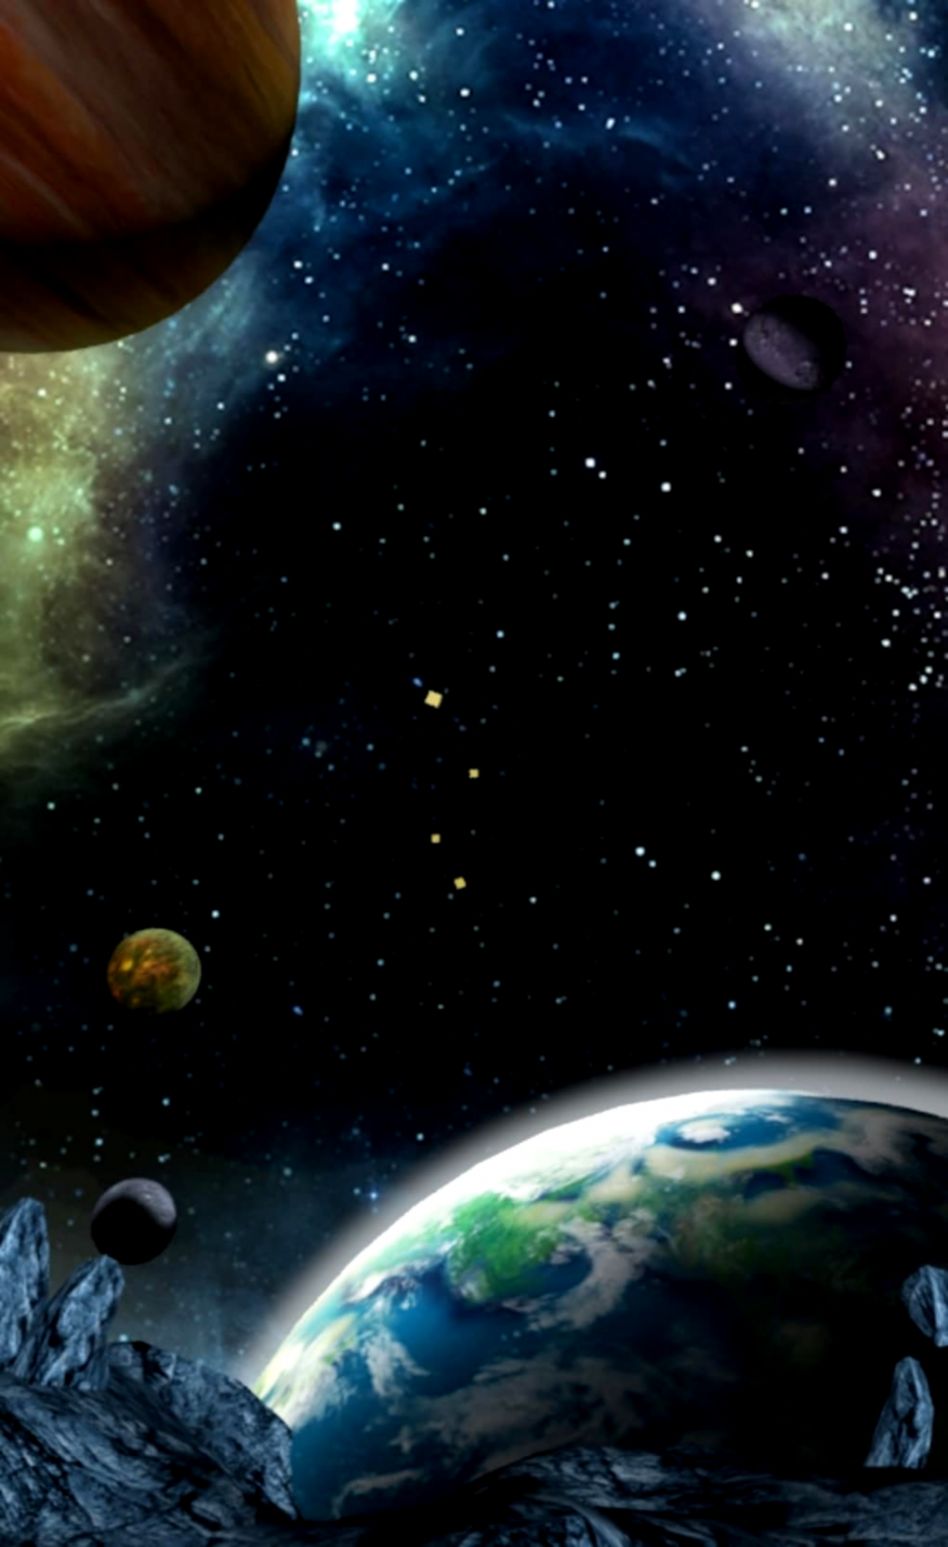 wallpaper phone android,outer space,planet,astronomical object,universe,sky